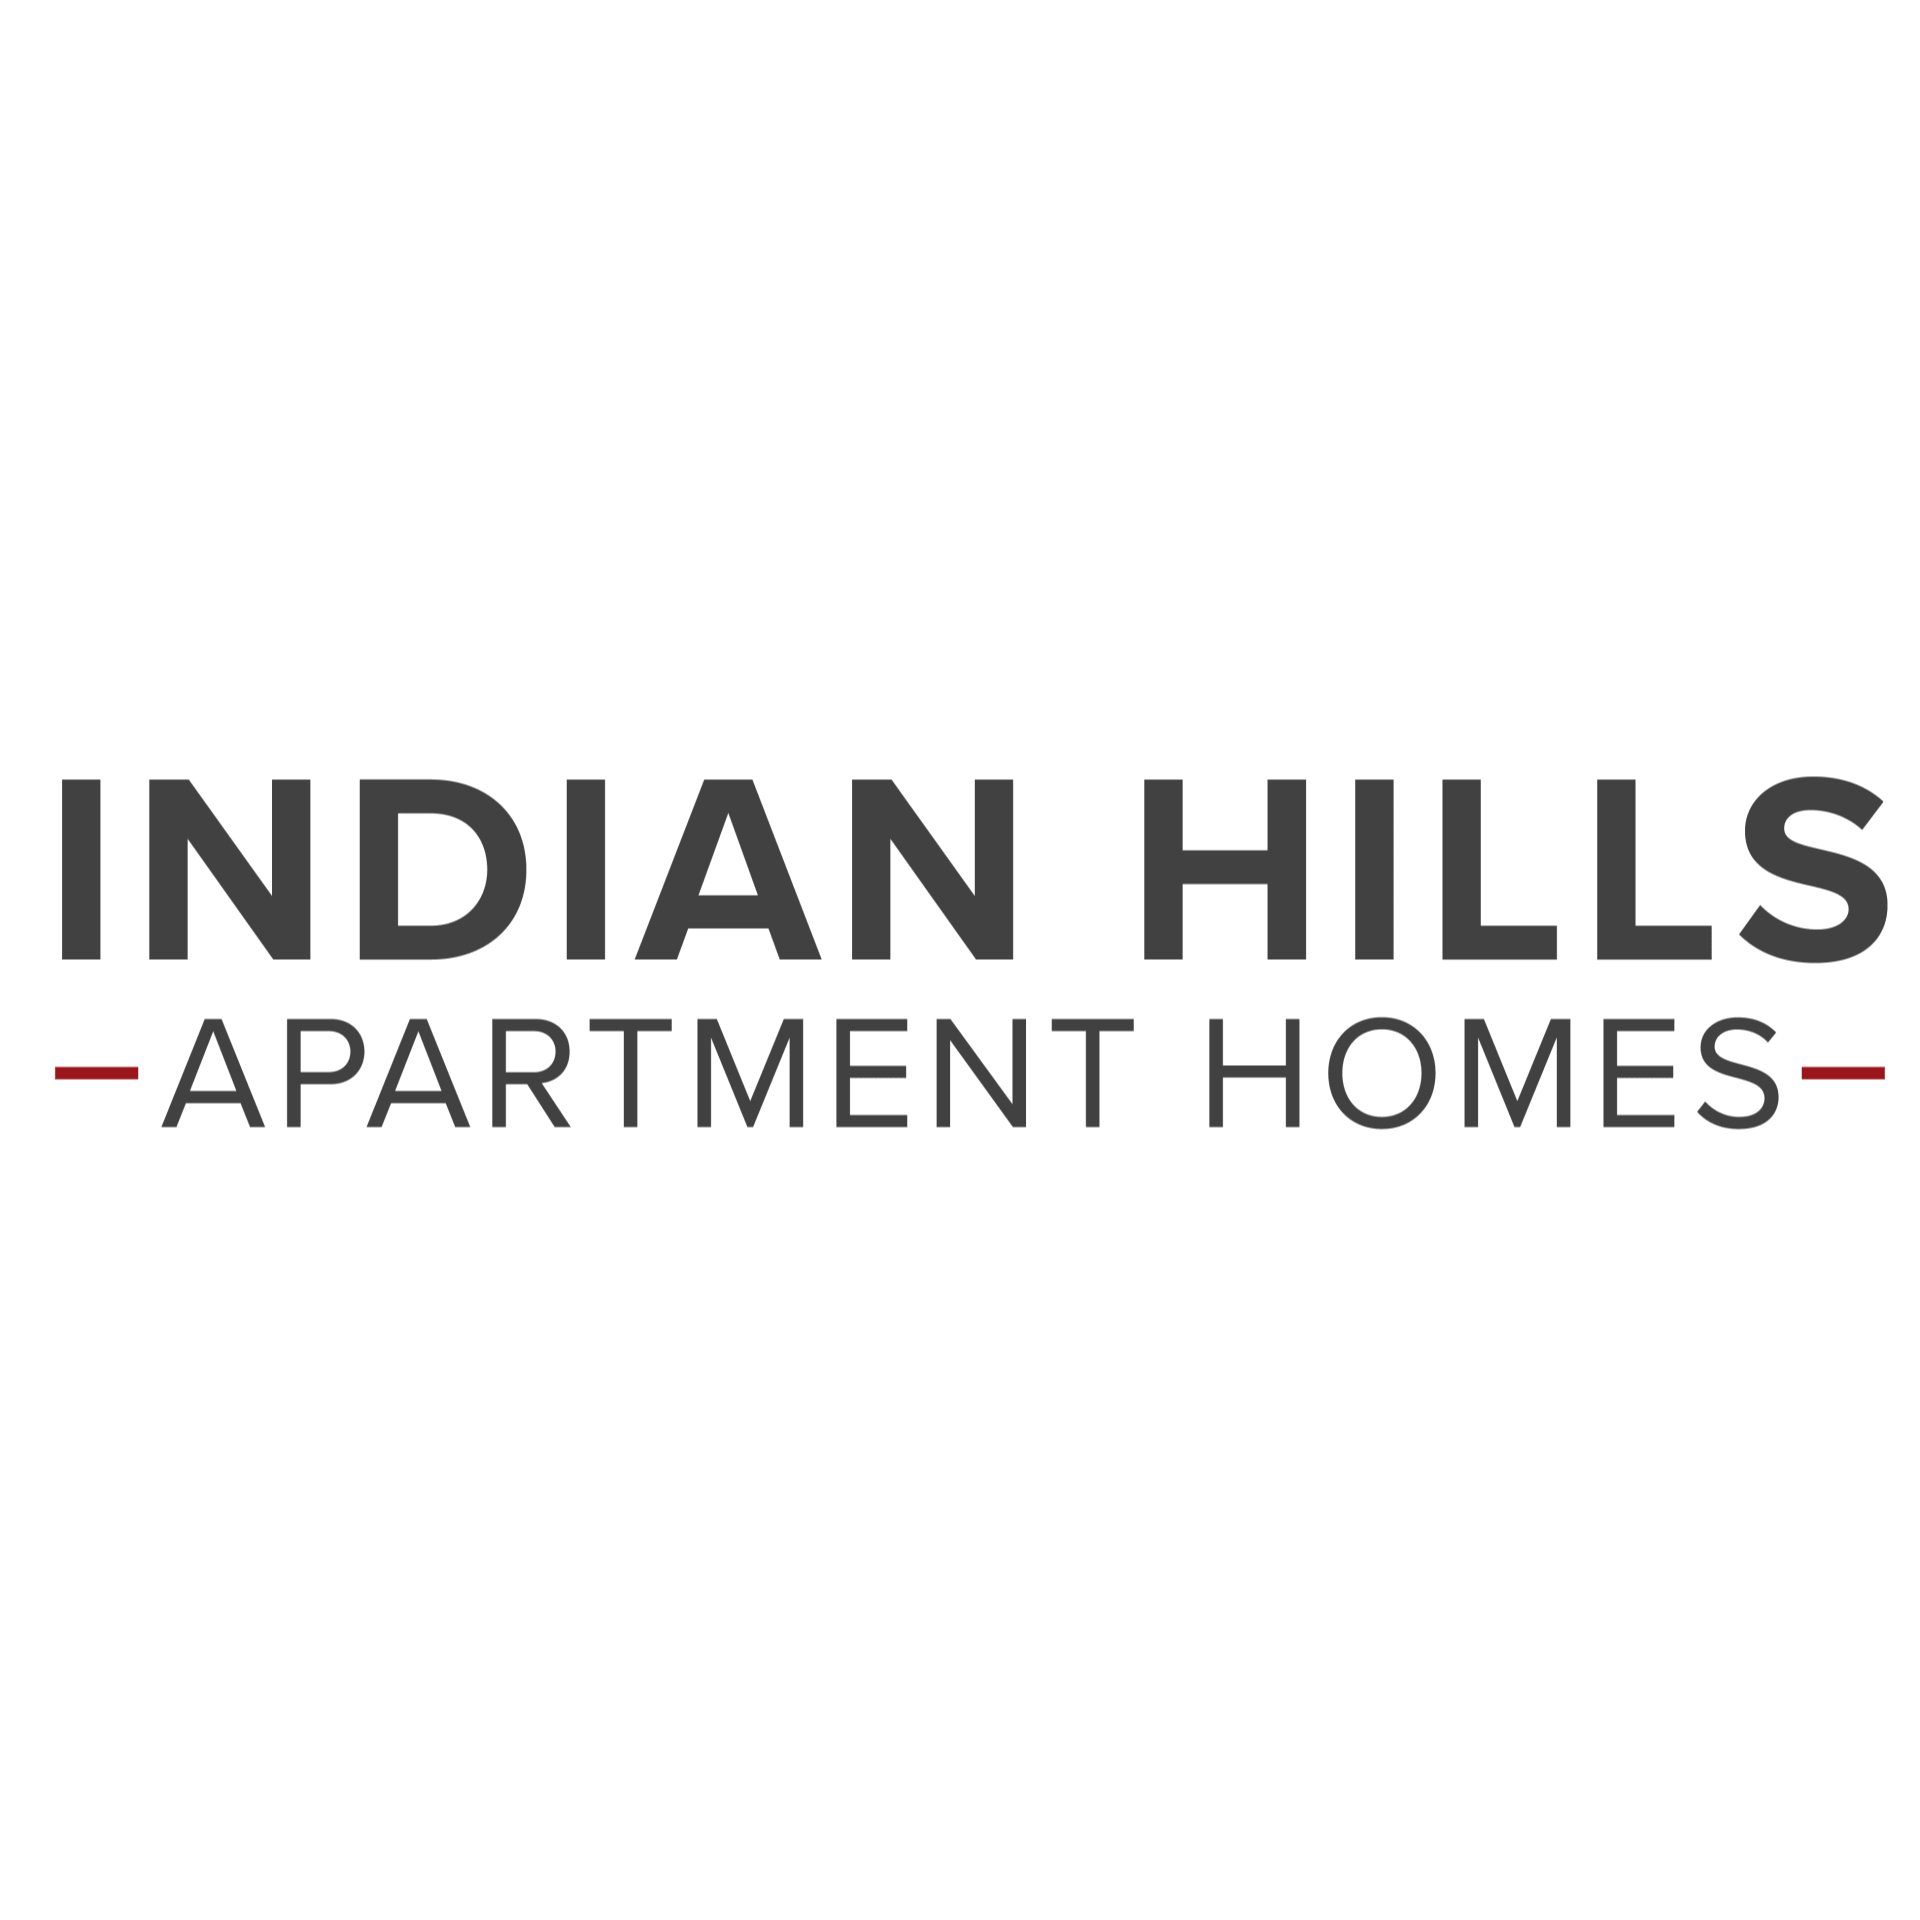 Indian Hills Apartment Homes